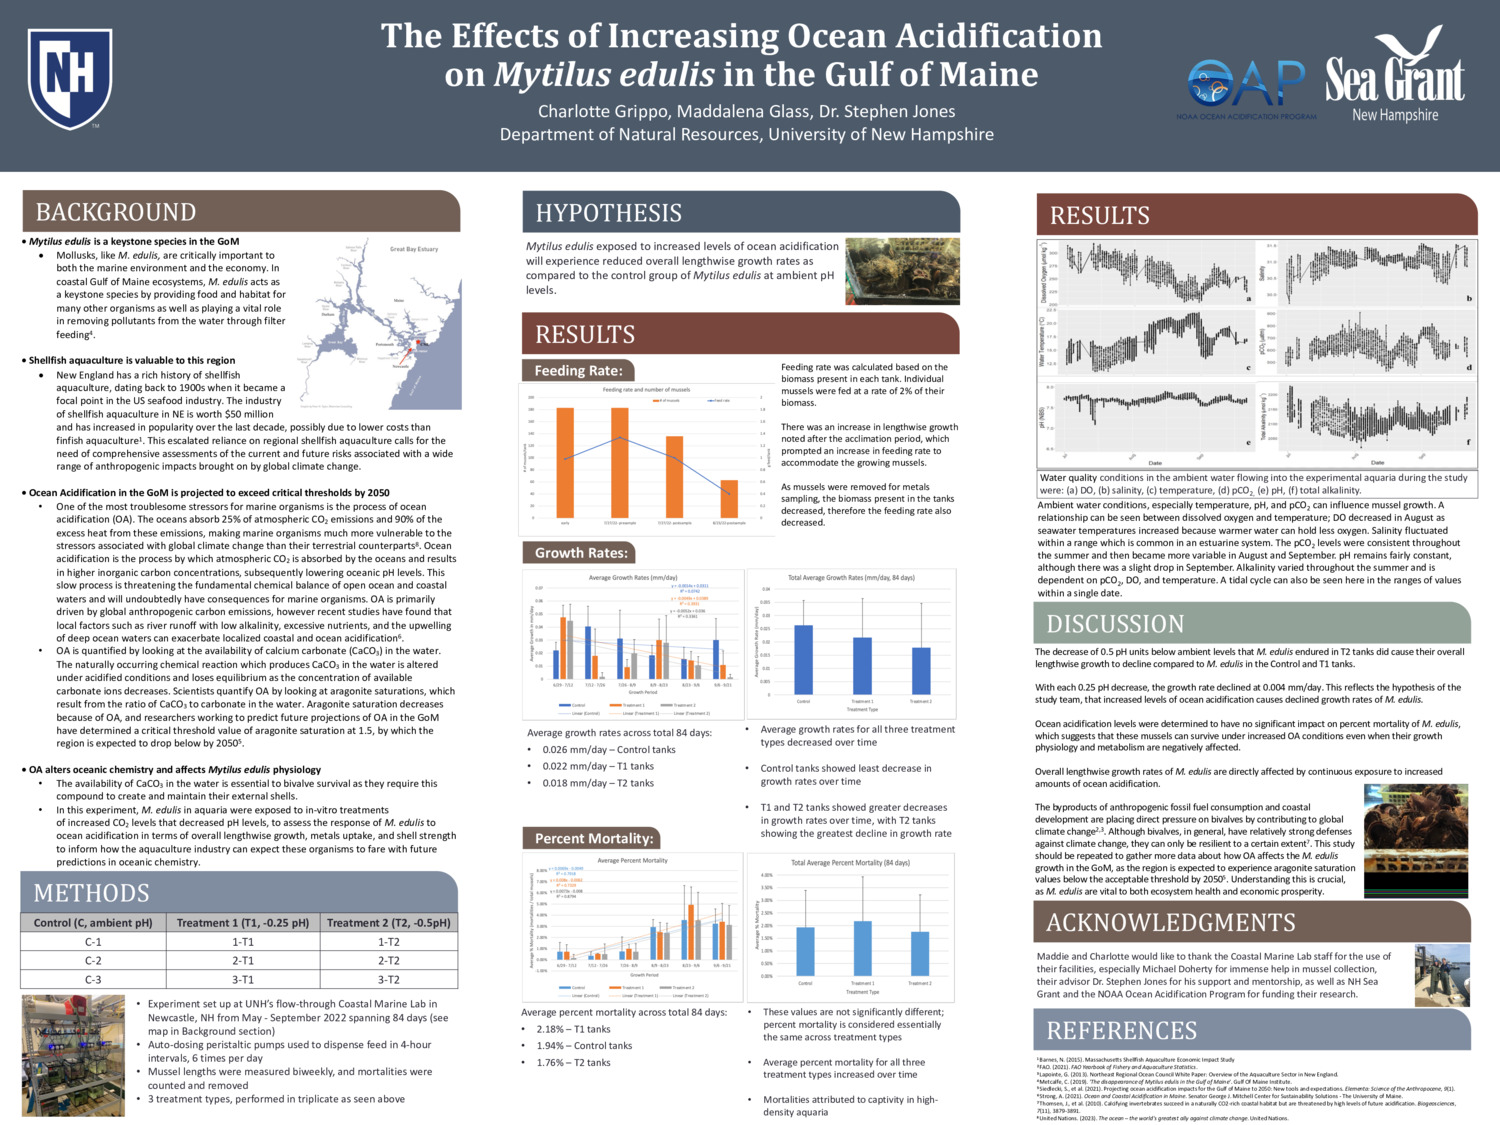 The Effects Of Increasing Ocean Acidification On Mytilus Edulis In The Gulf Of Maine by mtg1015